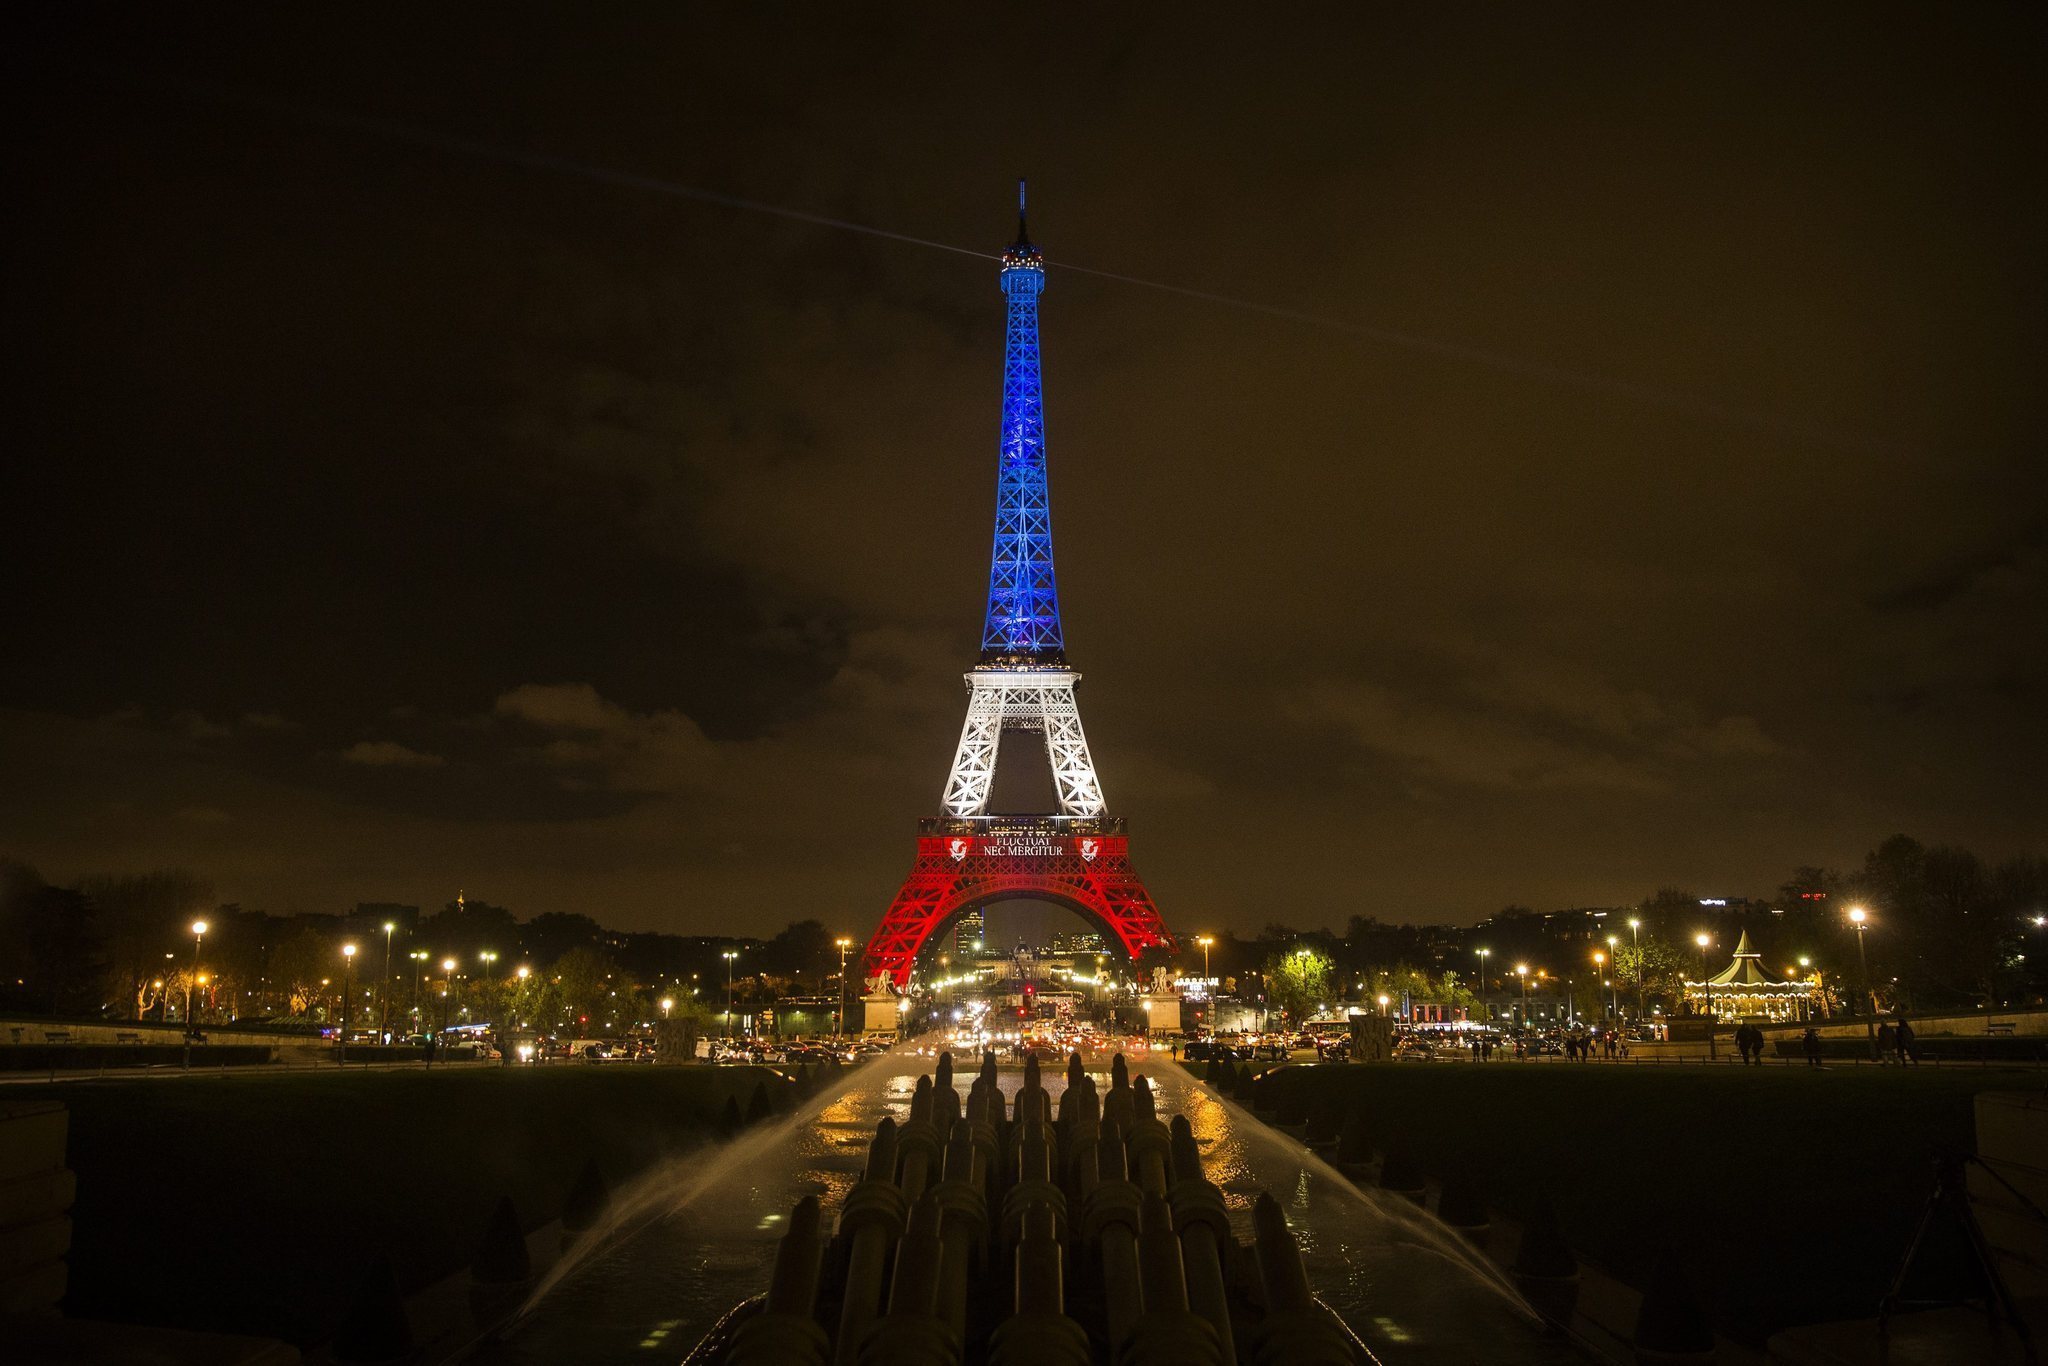 Photos: Eiffel Tower in the French flag's colors - Chicago Tribune